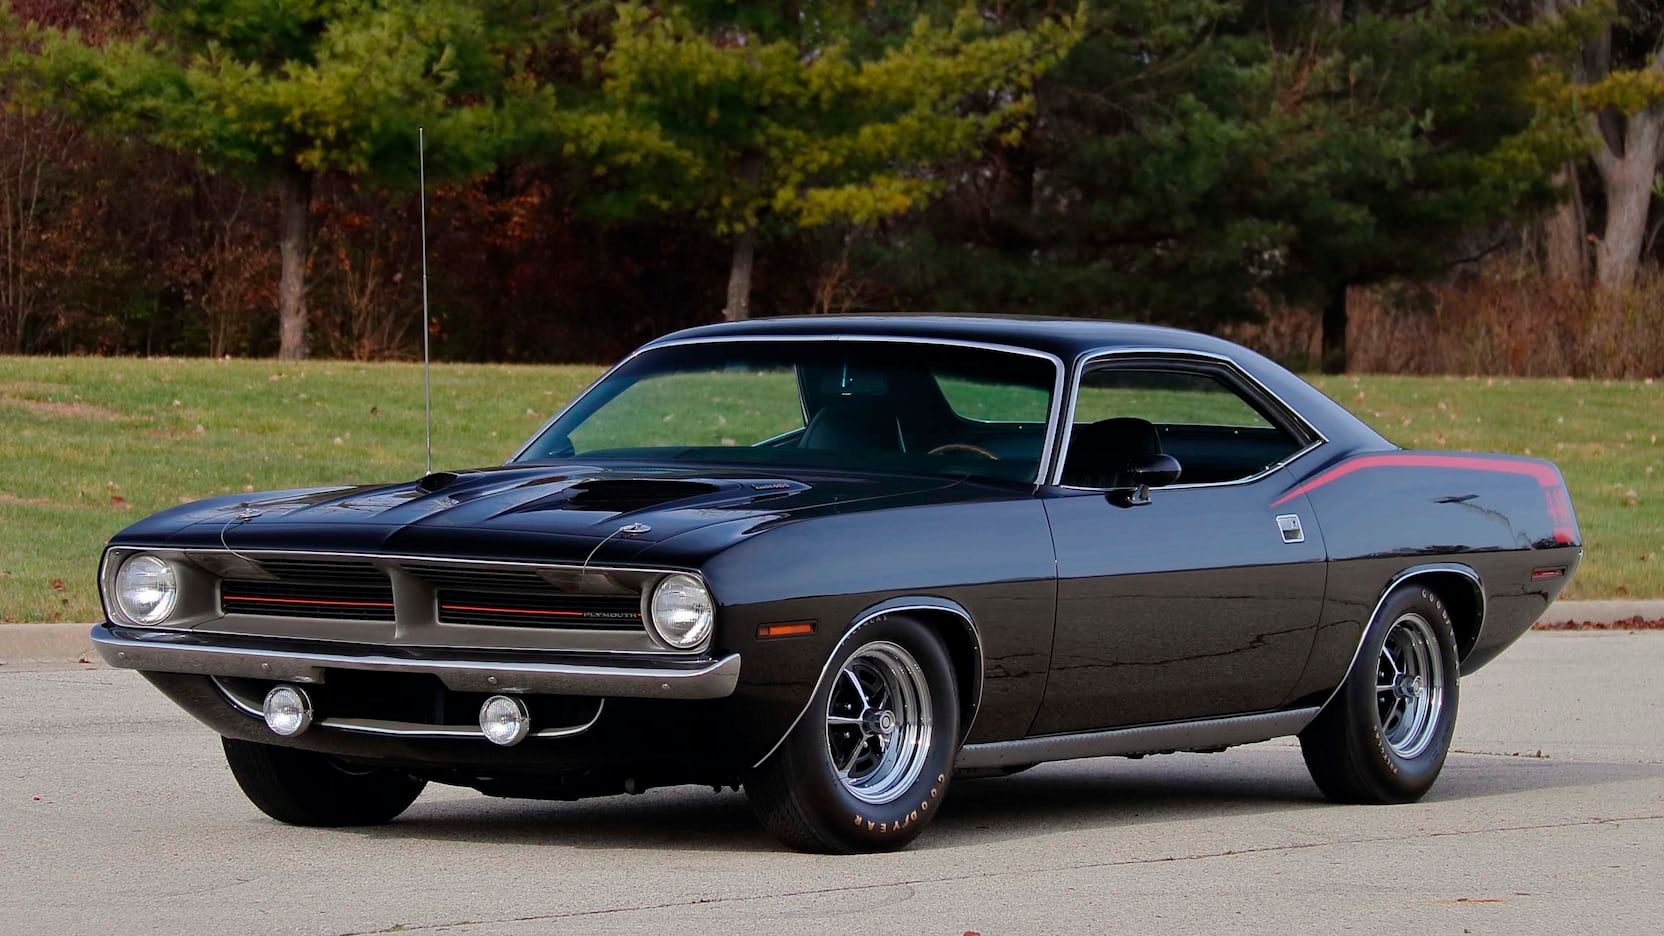 A parked 1970 Plymouth Barracuda